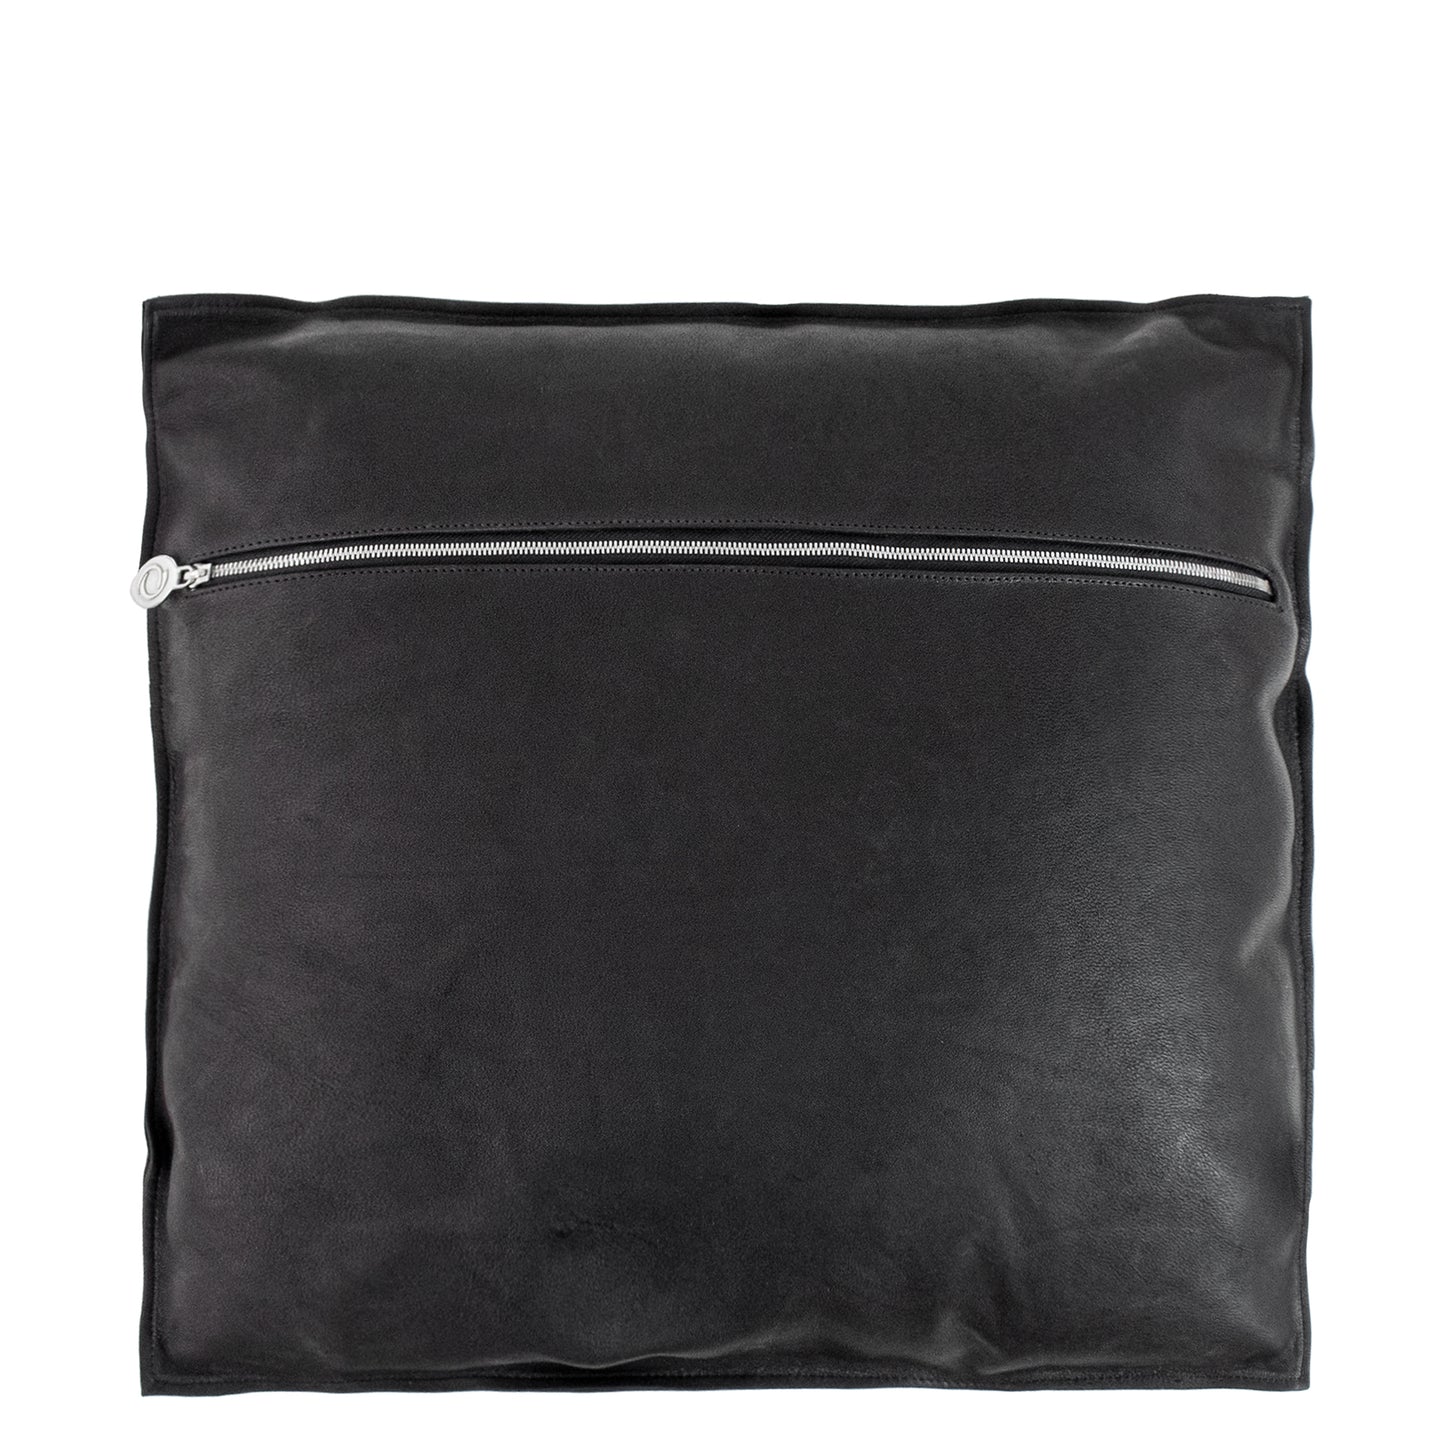 Corazon Pillow  (Includes pillow insert) 20" x 20"